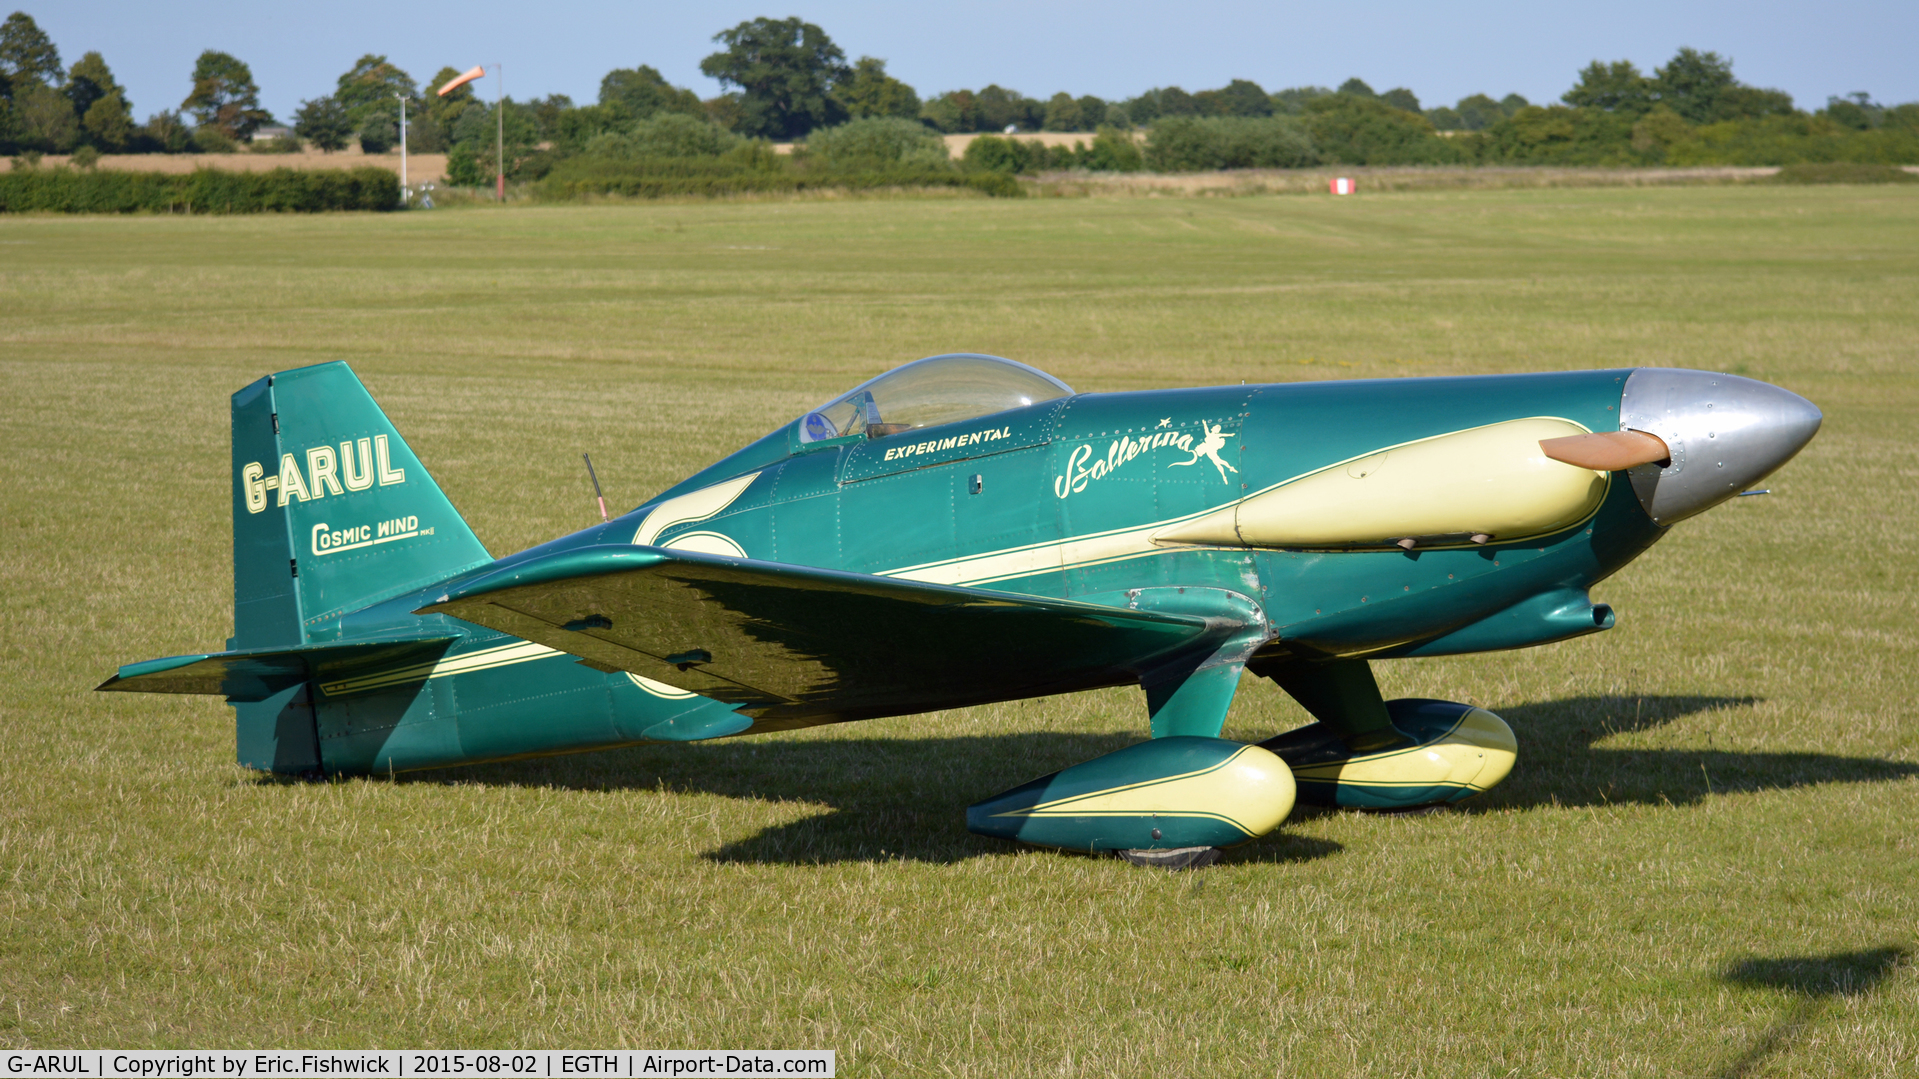 G-ARUL, 1973 LeVier Cosmic Wind C/N PFA 1511, 3. G-ARUL at The Shuttleworth Wings and Wheels Airshow, Aug. 2015.